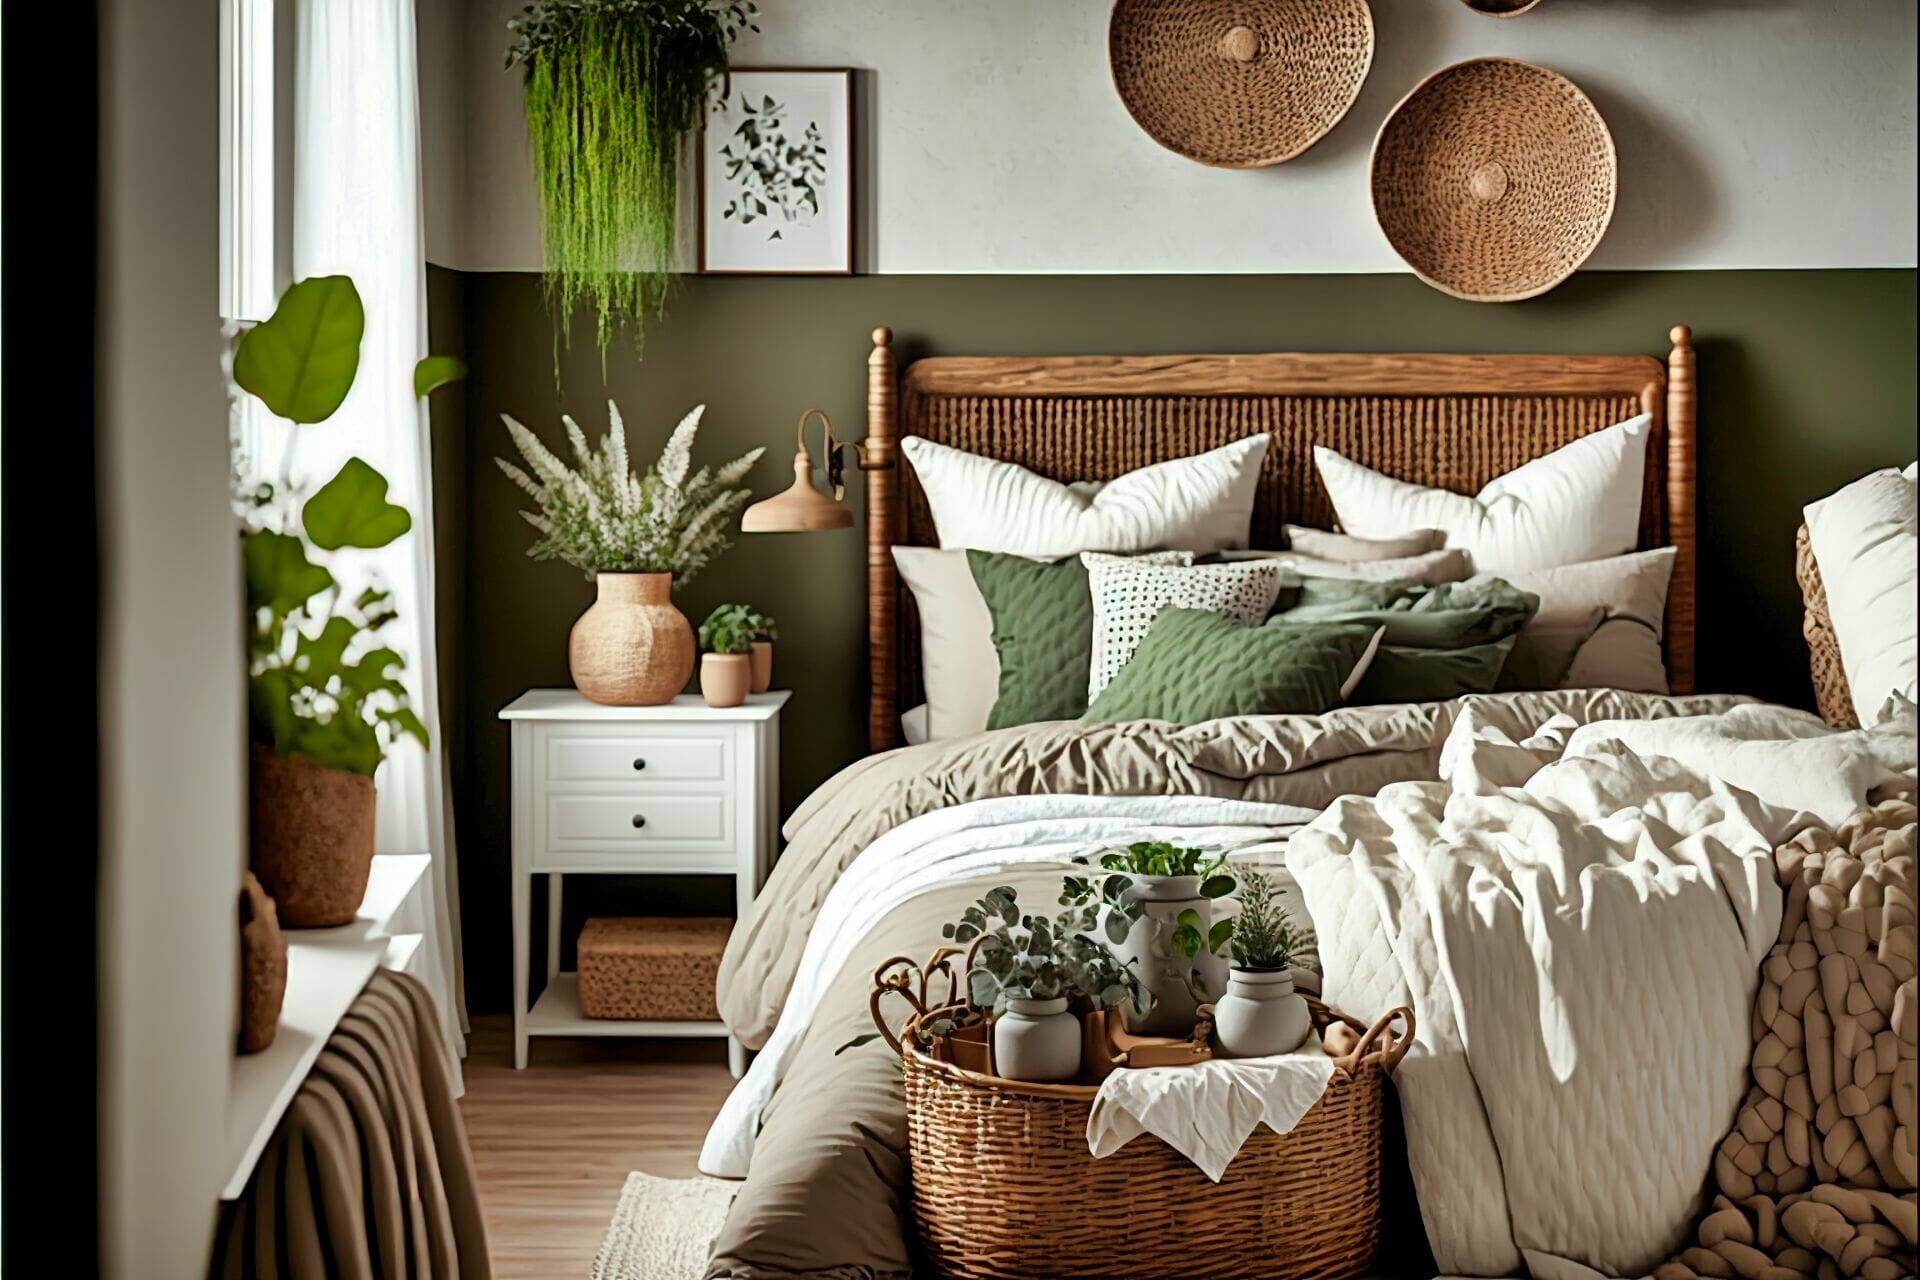 A Scandinavian Style Bedroom With Wood And Wicker Accents – This Bedroom Is Decorated With Wood And Wicker Accents For A Natural, Rustic Feel. The Bed Frame And Nightstand Are A Dark Wood, And The Headboard Is A Woven Wicker. Natural Colors— Green, Brown, And White—Are Used For The Bedding, And A White Sheepskin Rug Lies On The Floor.